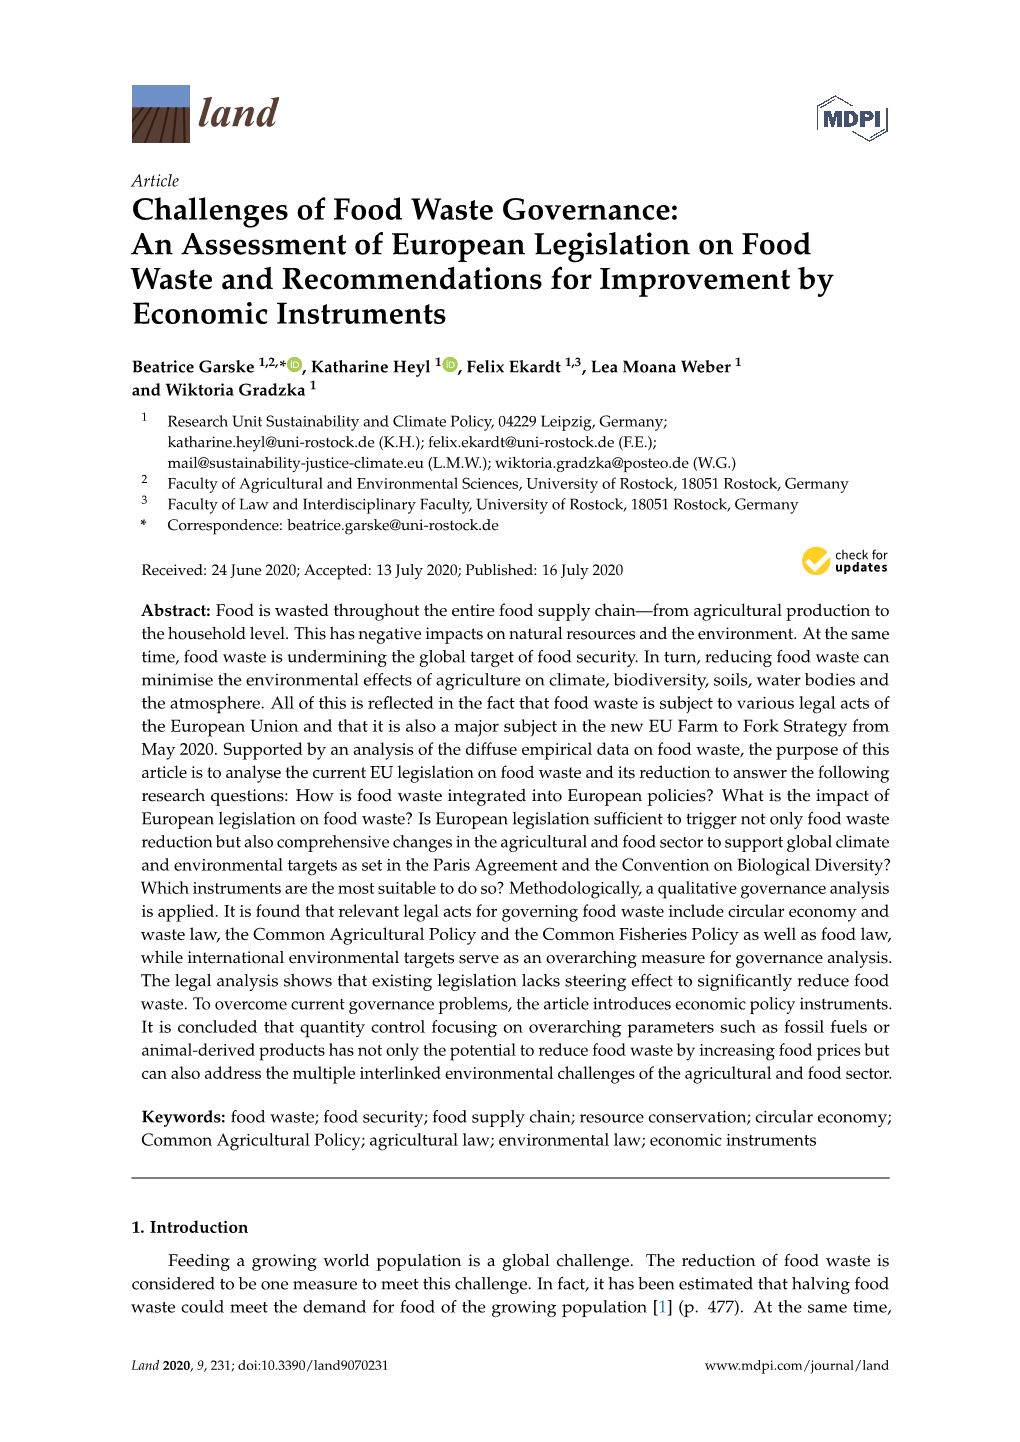 Challenges of Food Waste Governance: an Assessment of European Legislation on Food Waste and Recommendations for Improvement by Economic Instruments